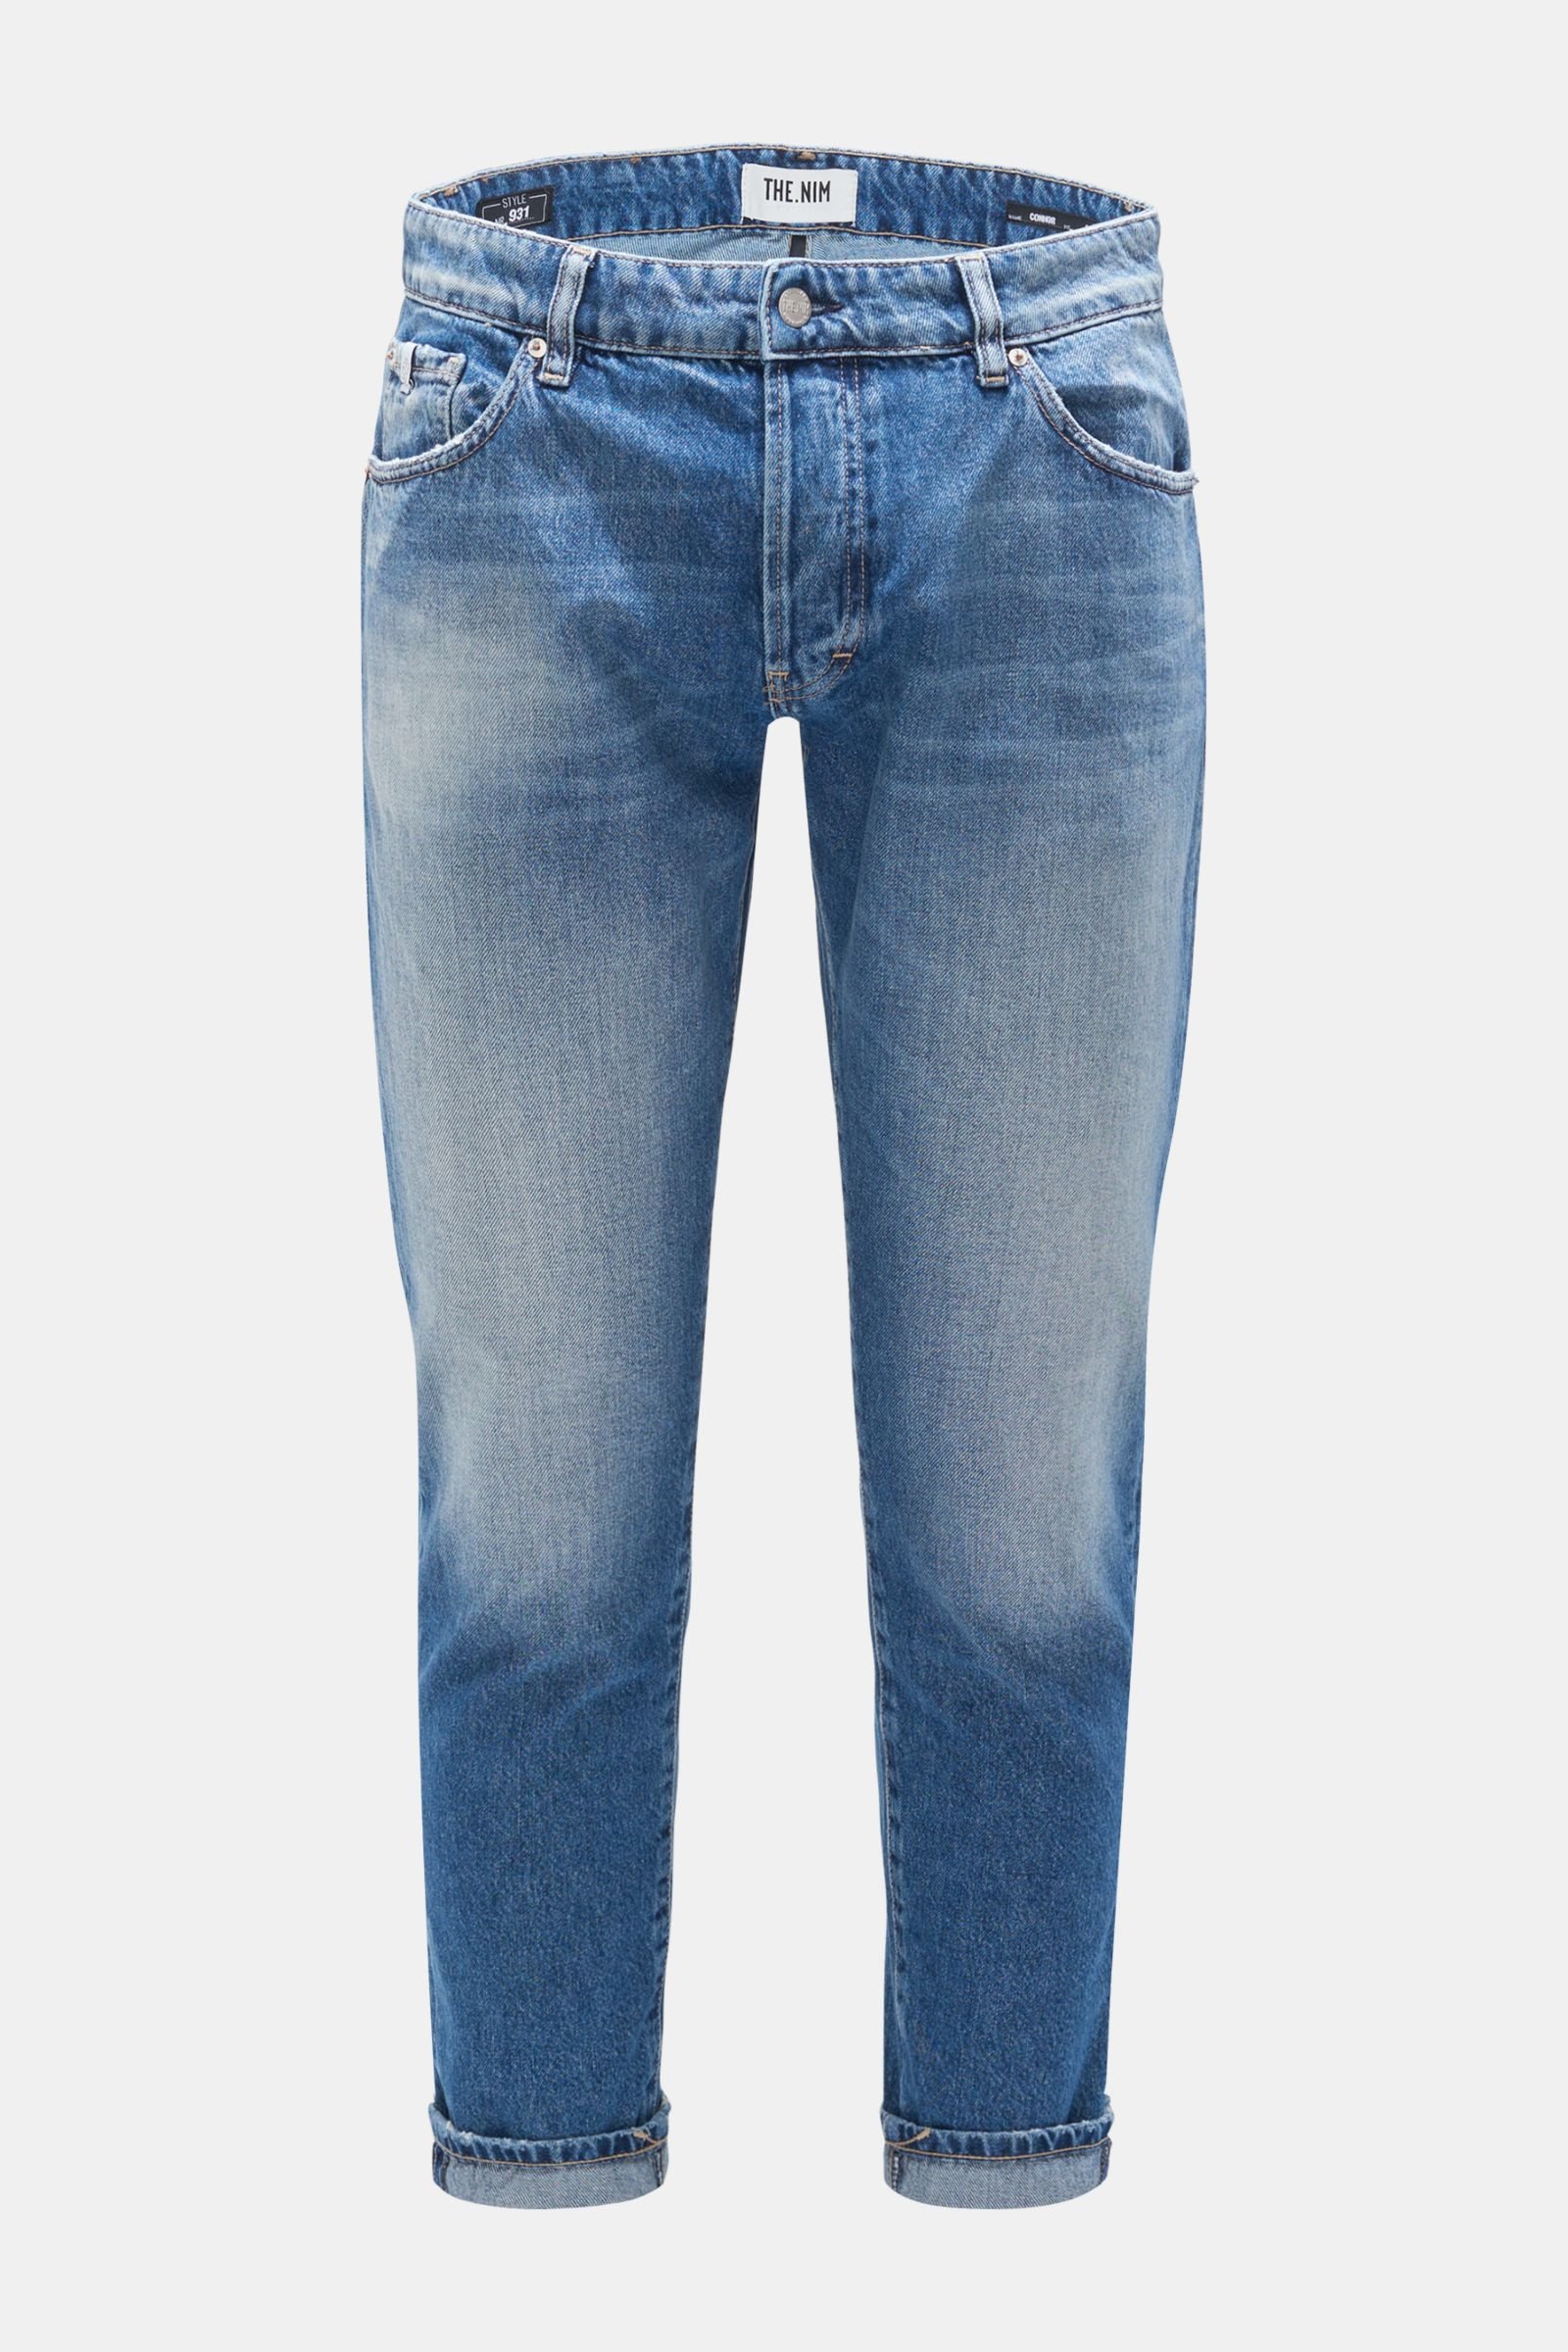 Jeans '931 Connor Carrot' grey-blue